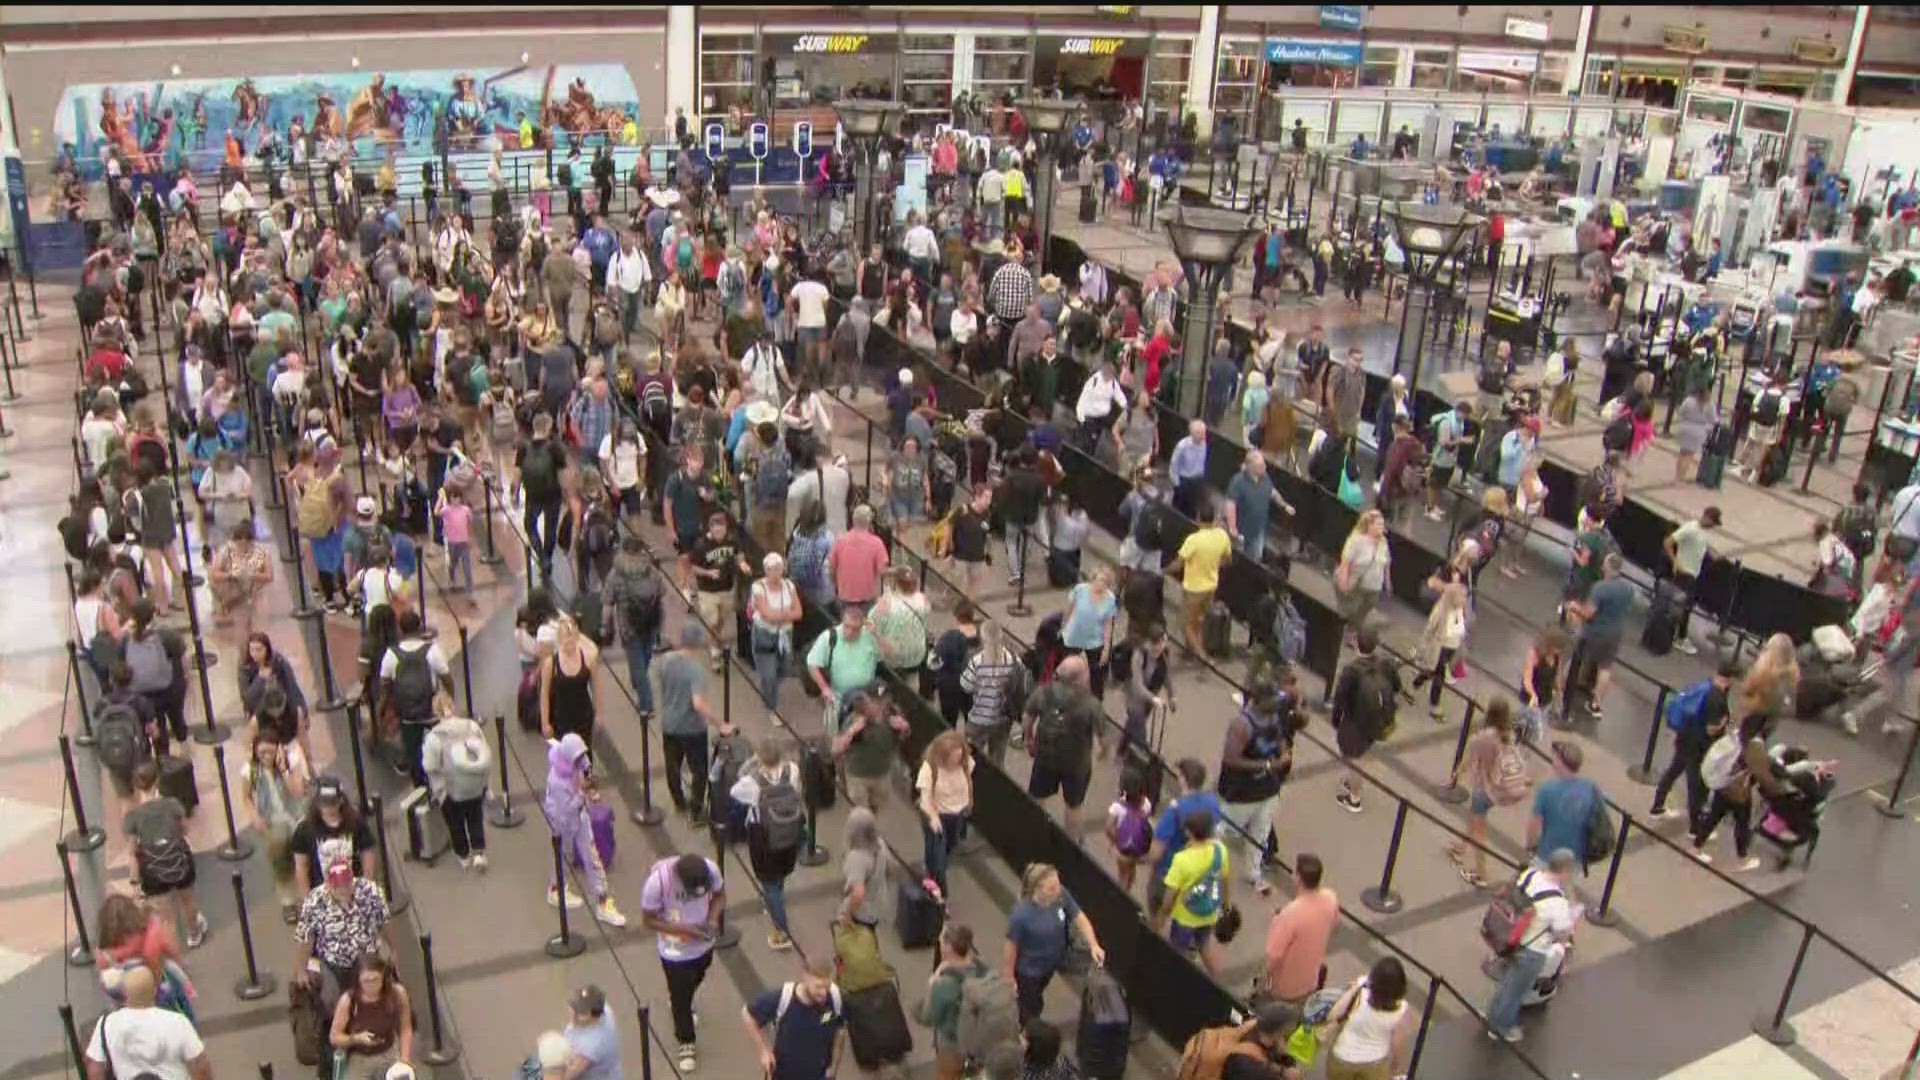 New security lines set to open at Denver International Airport early next year should help. In the meantime, "we're doing everything we can," a spokesman says.